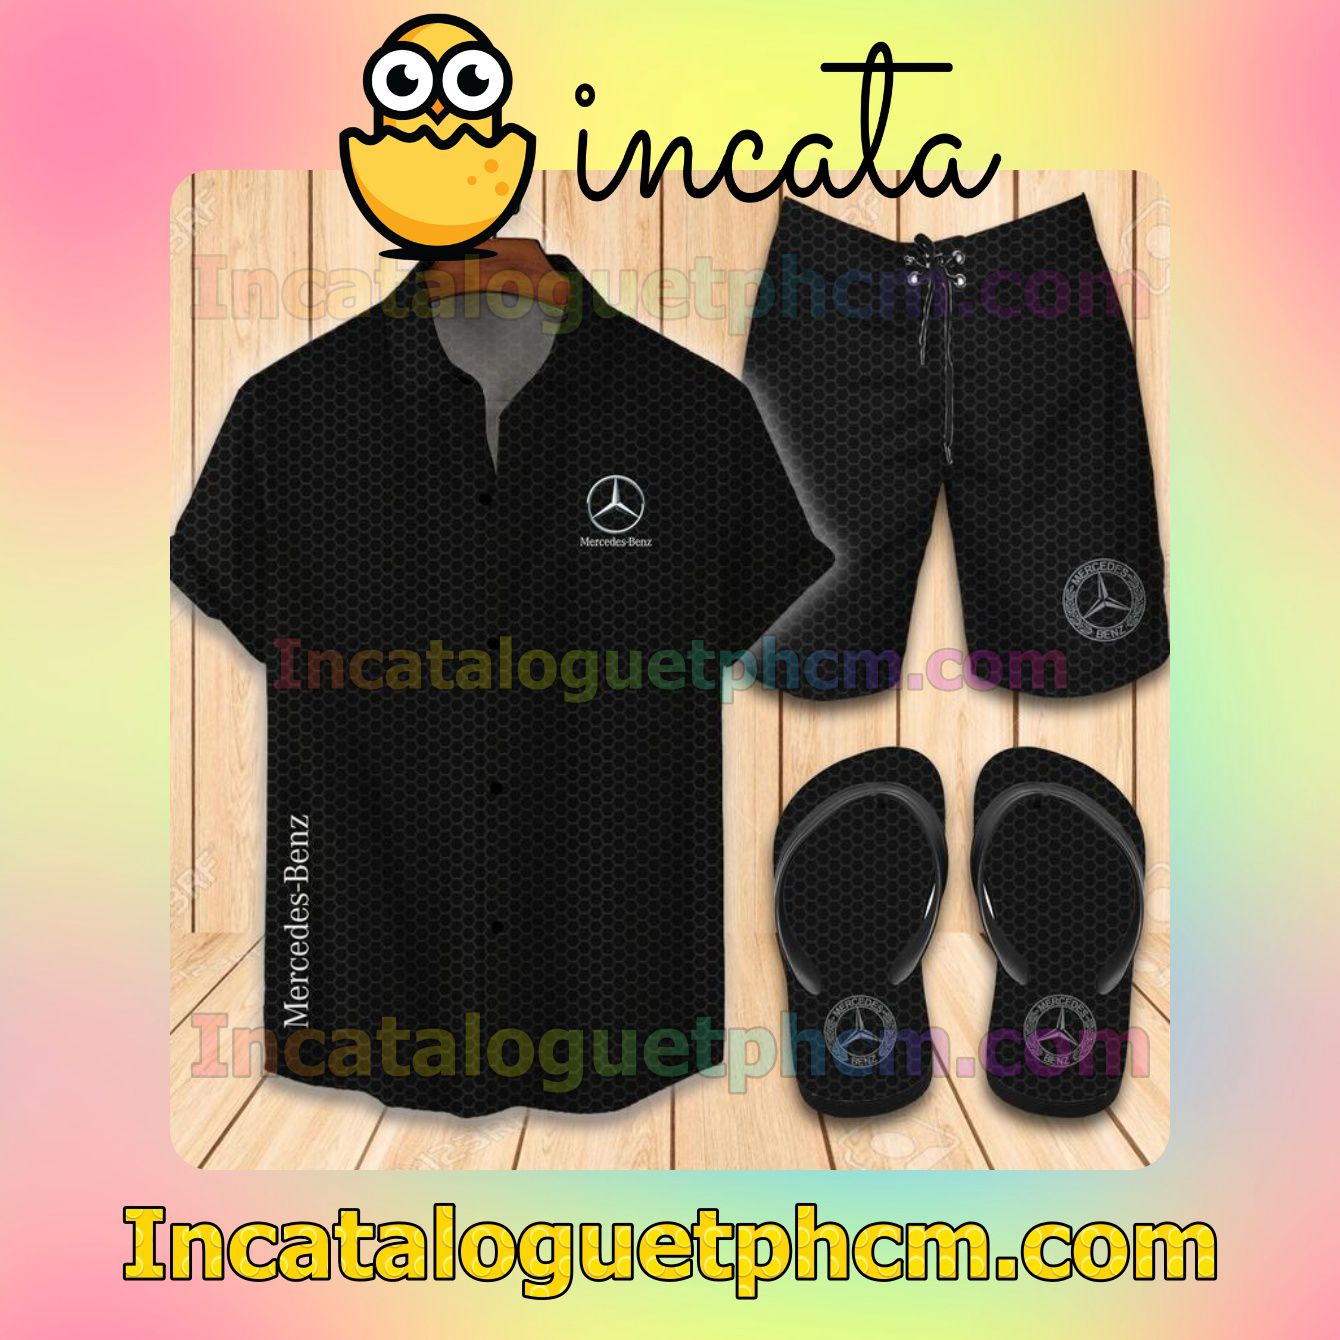 Check out Mercedes Benz Aloha Shirt And Shorts